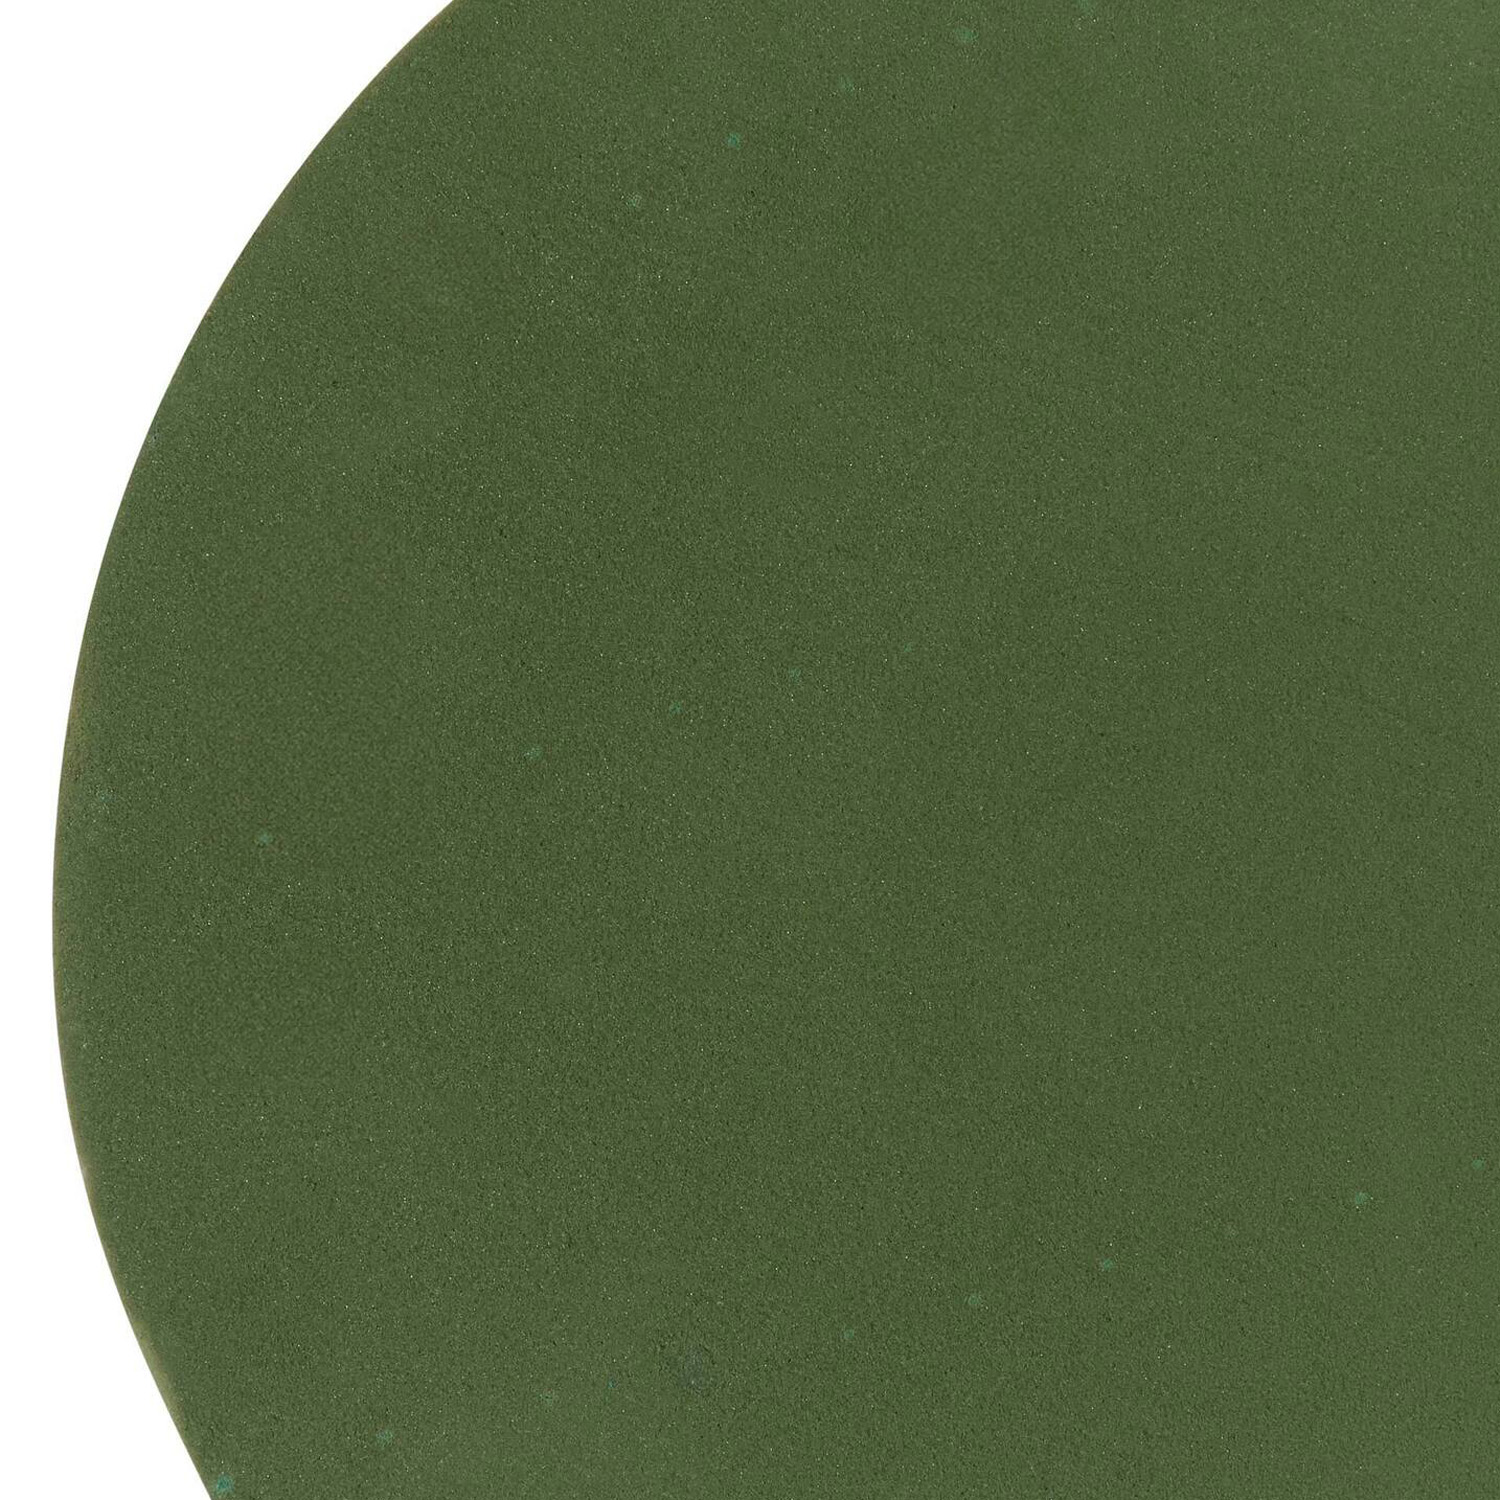 Pack of 2 Round Foams - Green Image 4